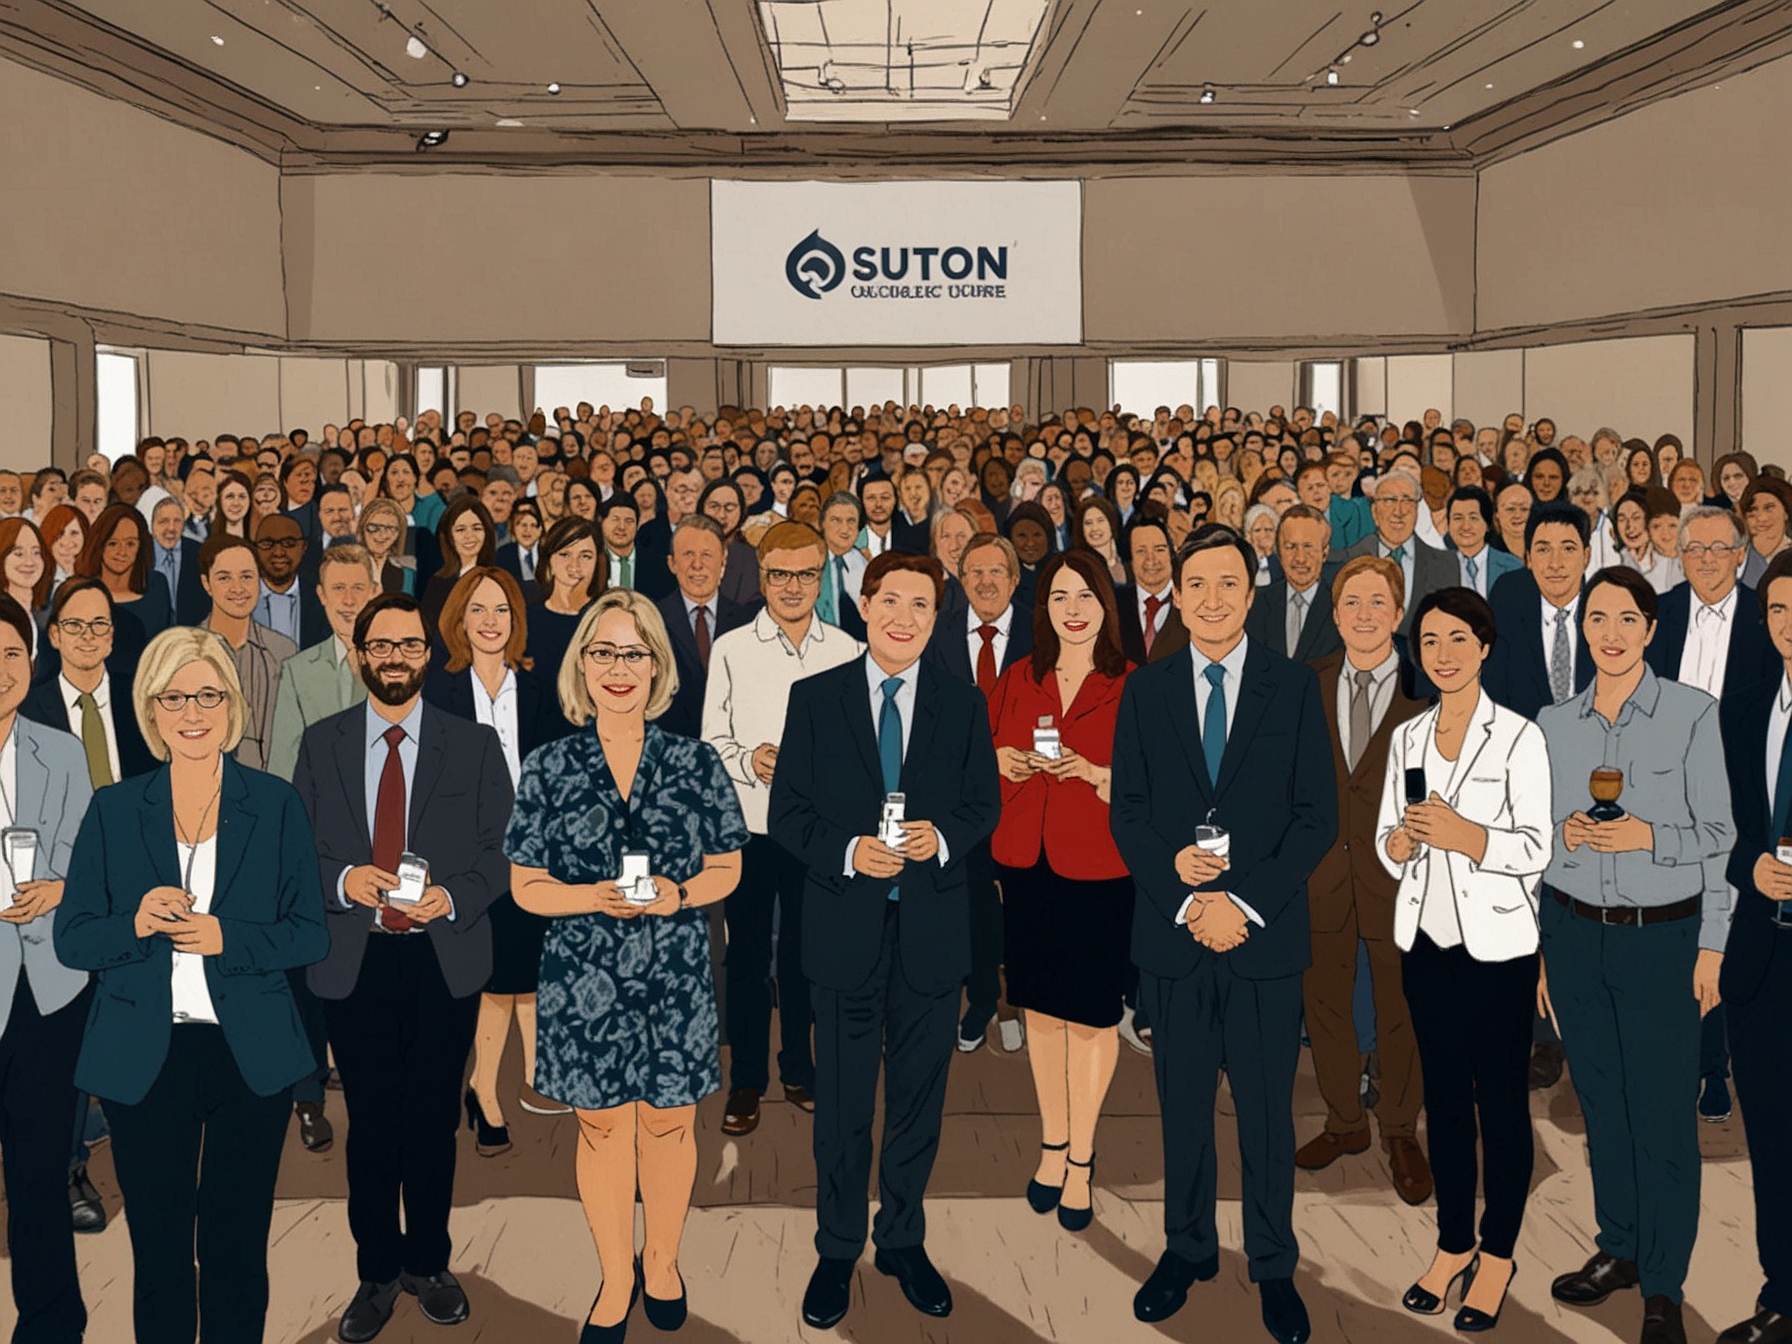 Attendees at the Sutton Québec 'Invested for the Future' event celebrate the company's new brand image, highlighted by a modernized logo and a revamped website designed to enhance user experience and accessibility.